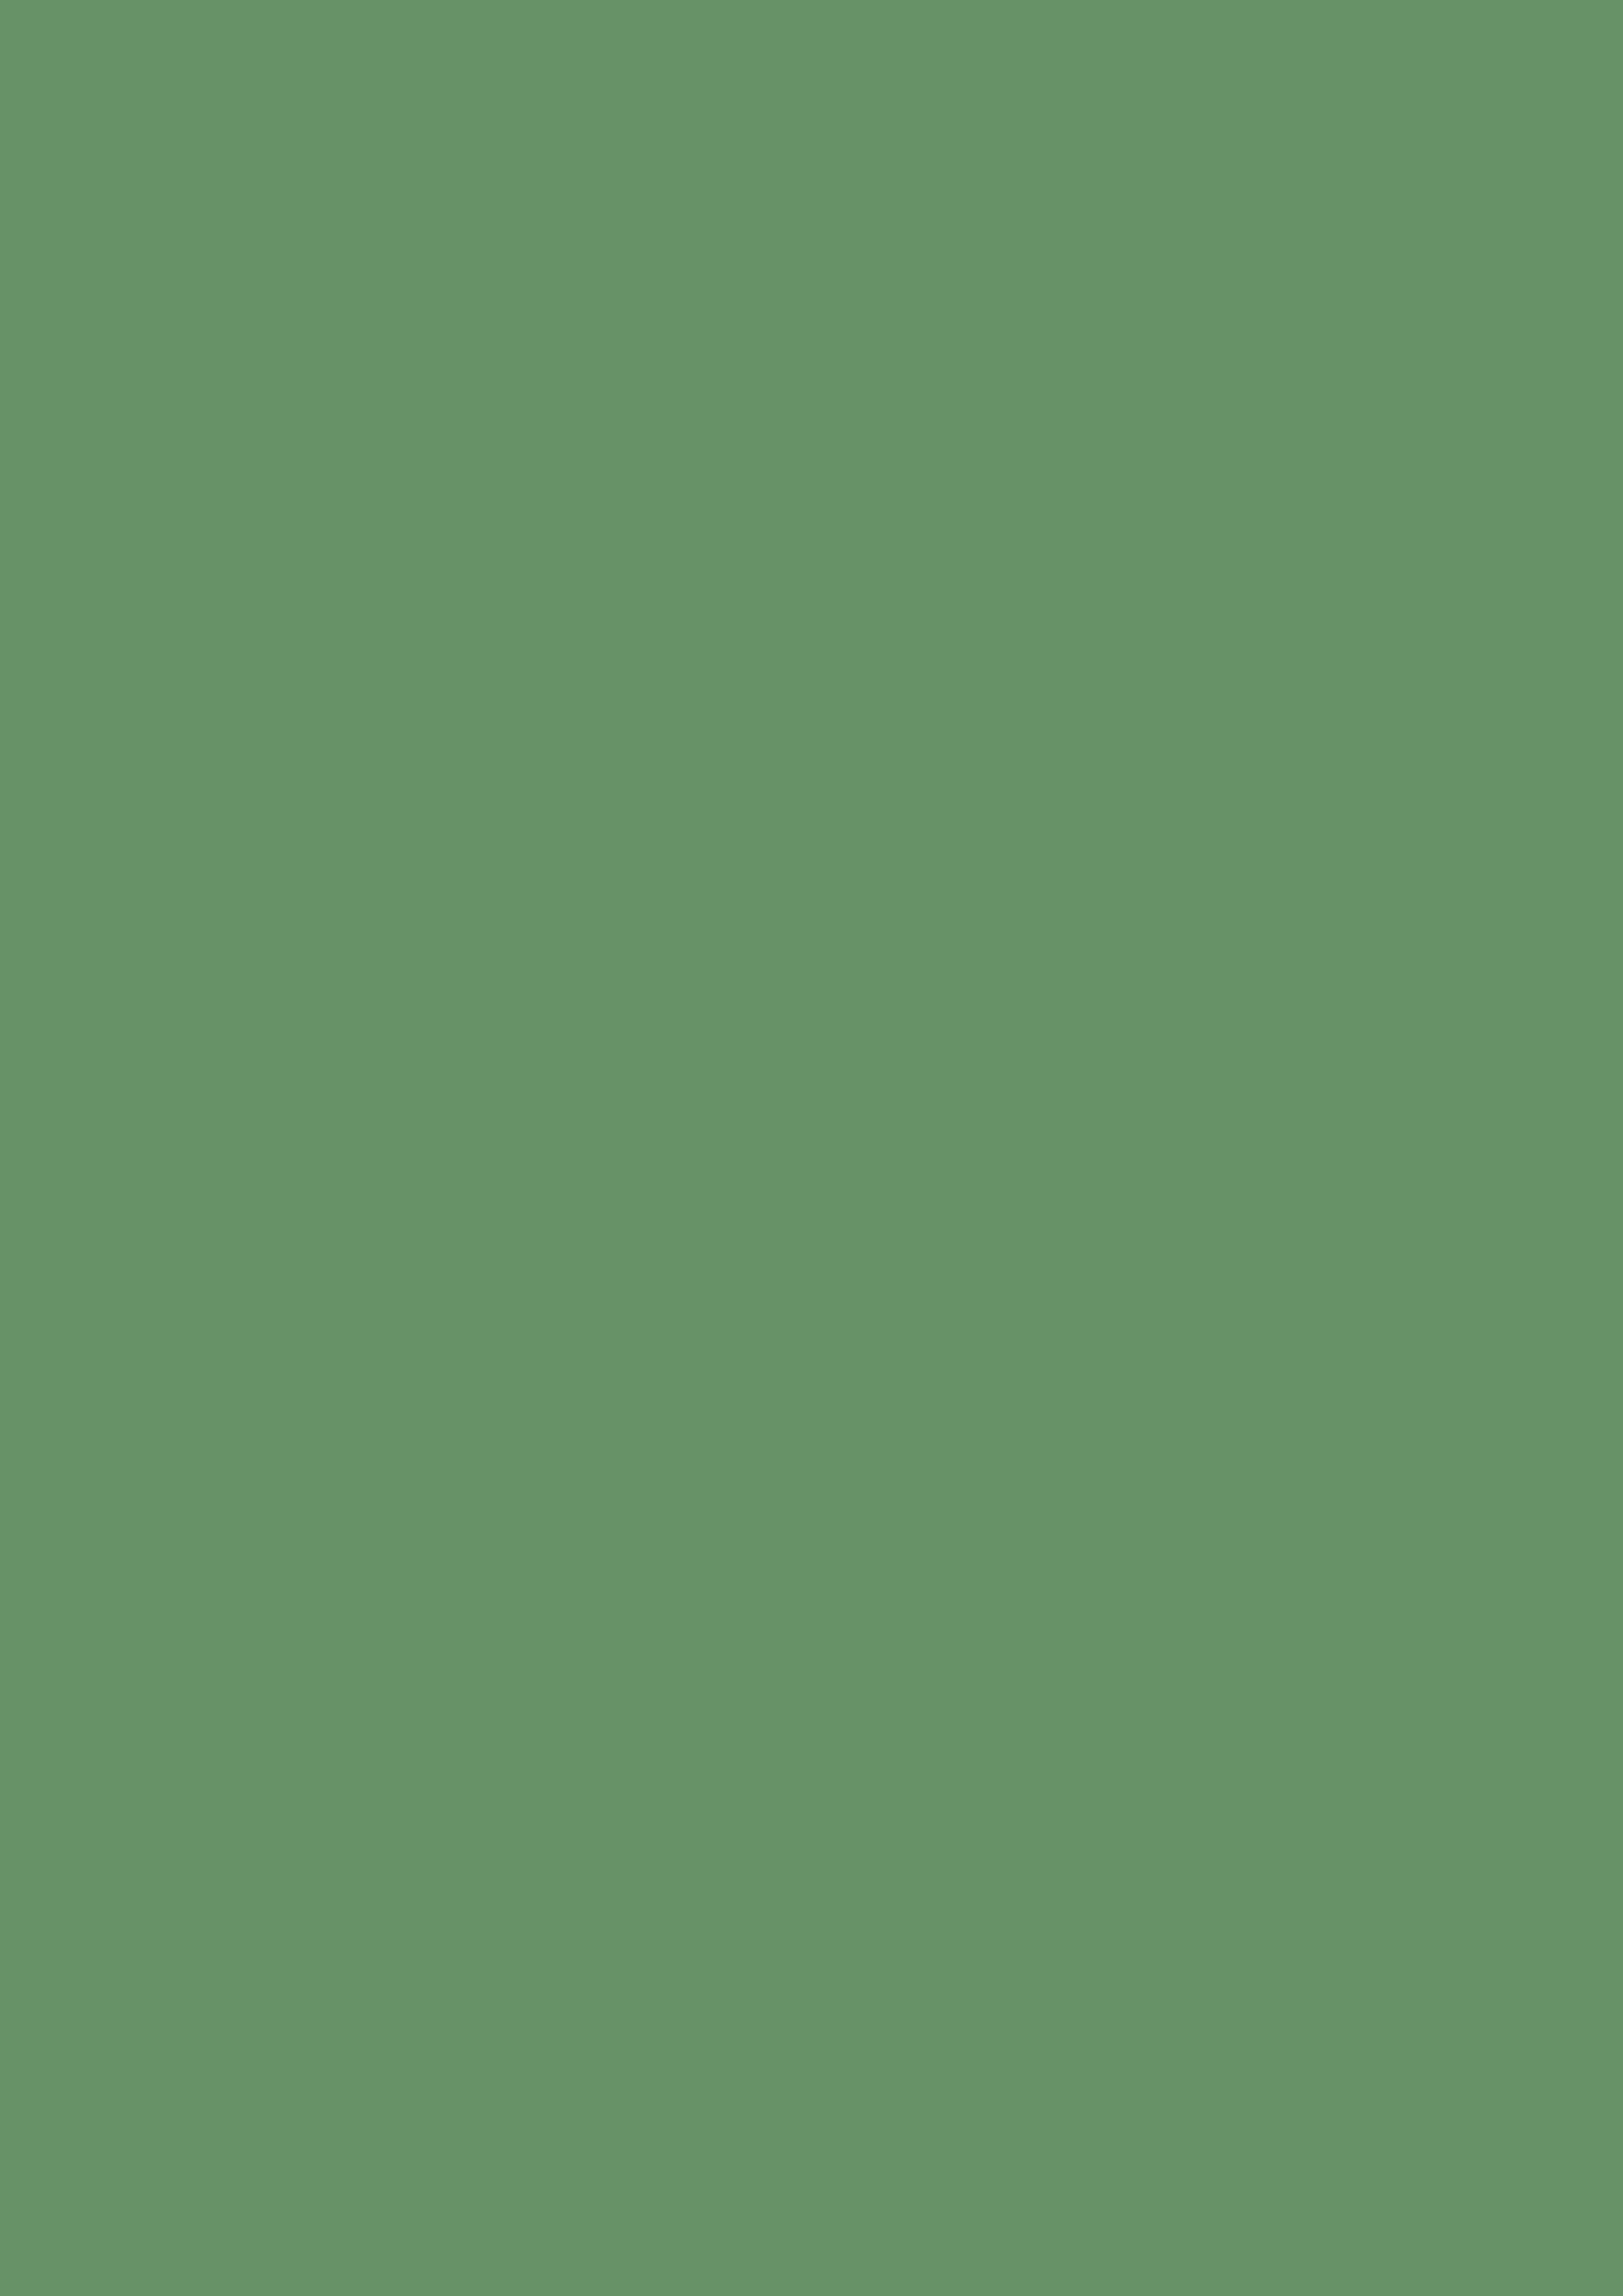 2480x3508 Russian Green Solid Color Background